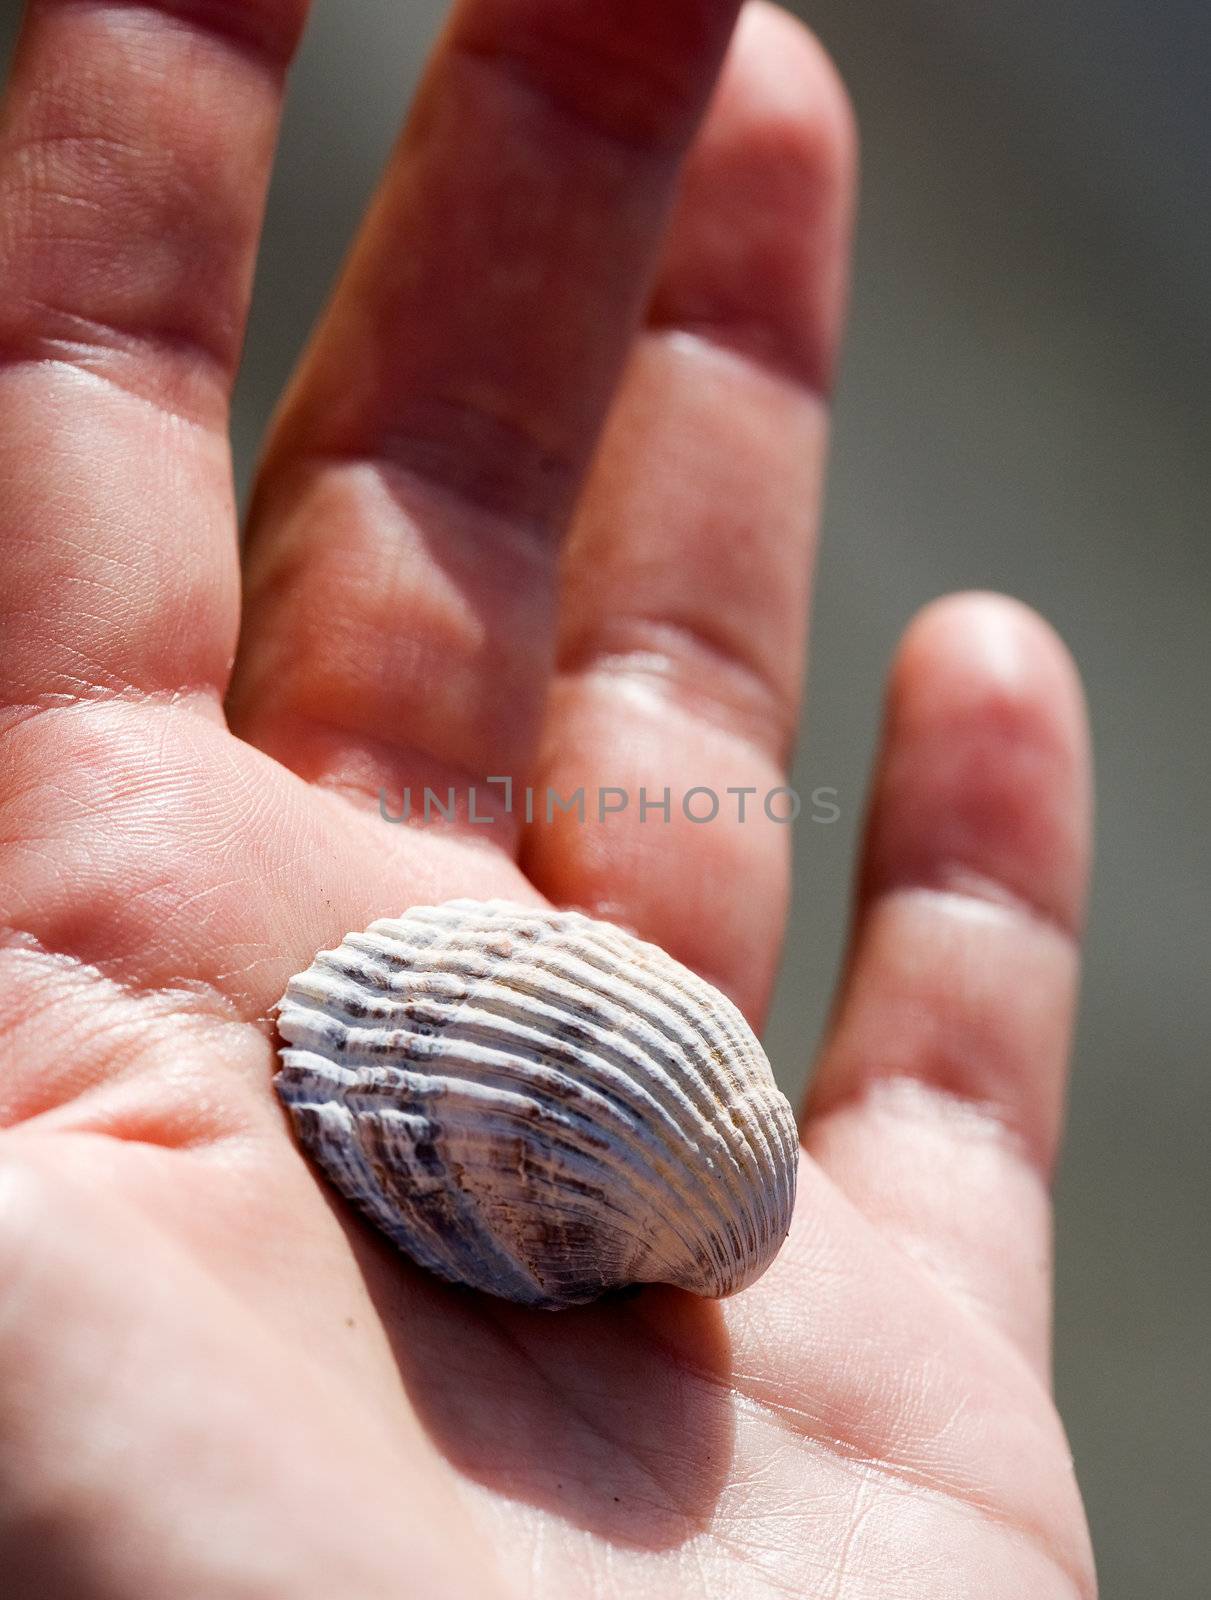 A sea shell in a hand - collection